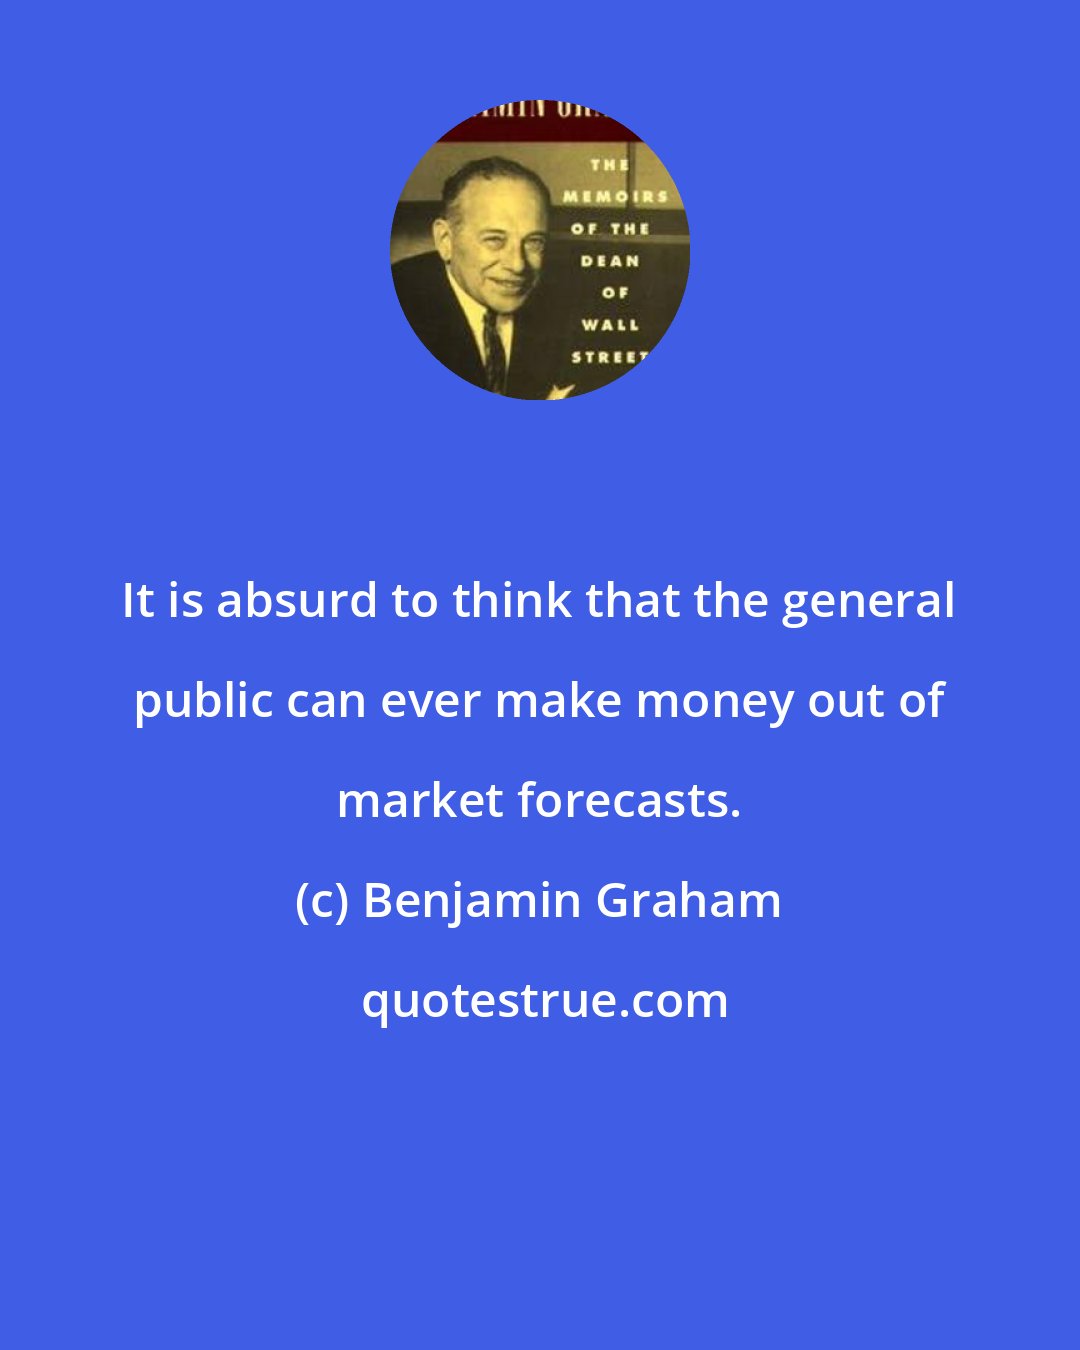 Benjamin Graham: It is absurd to think that the general public can ever make money out of market forecasts.